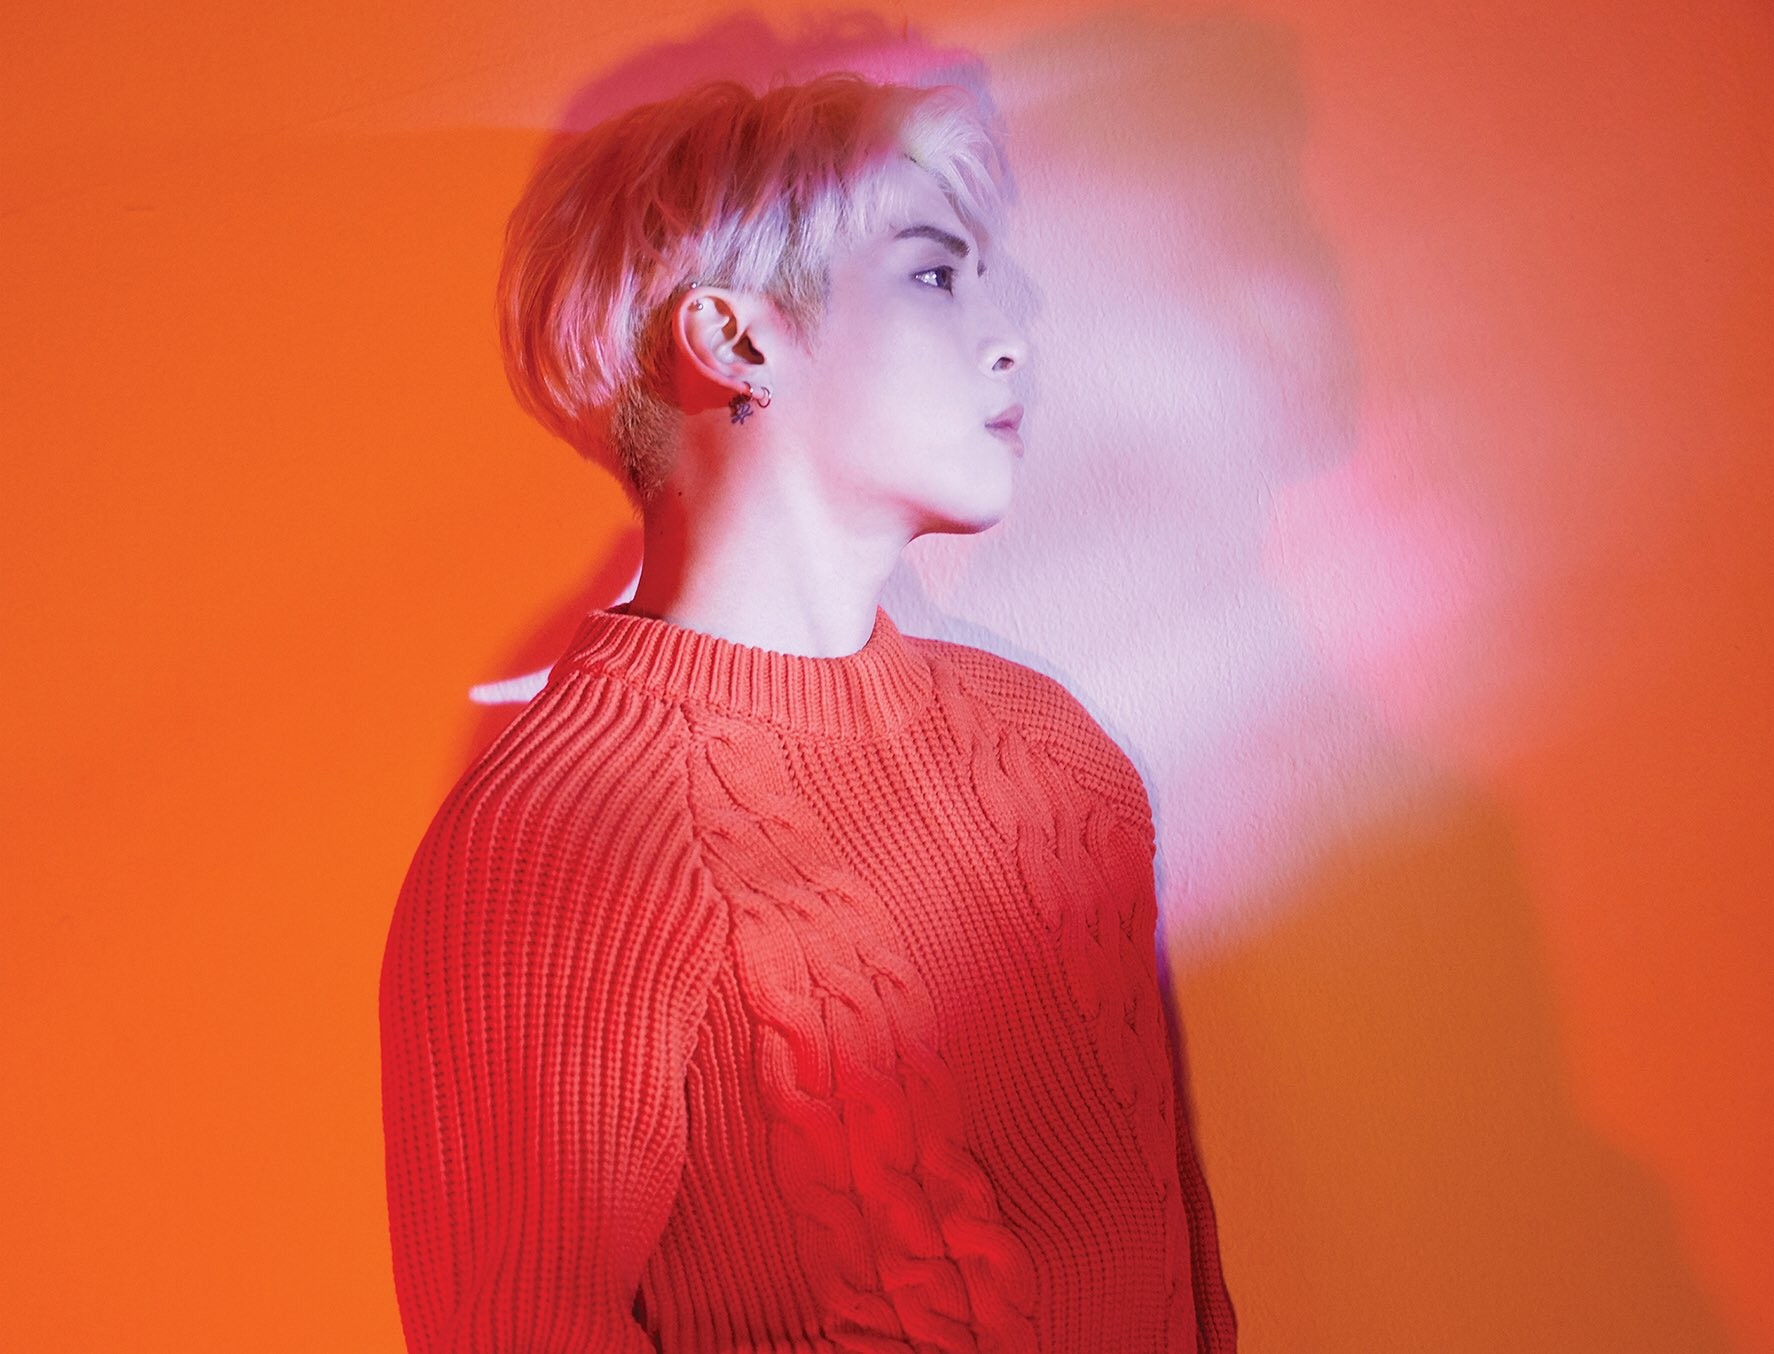 K-pop star Jonghyun of Shinee committed suicide in 2017. Performers and fans talked about mental health issues at the KCON K-pop convention in the US.